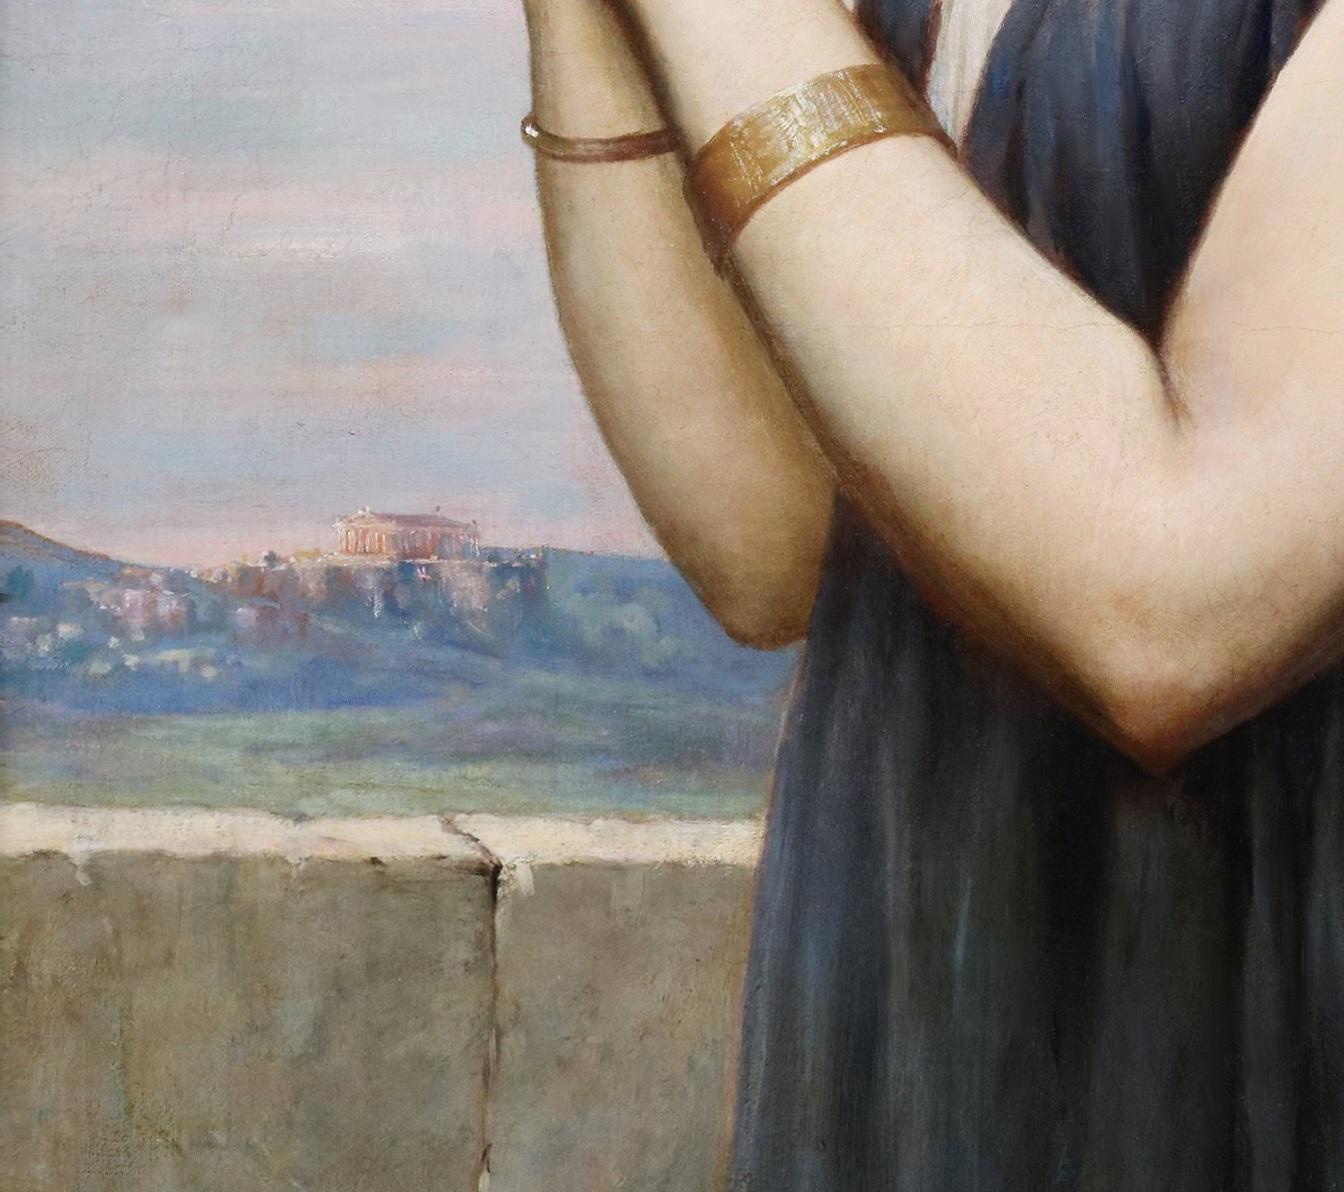 ‘Melancholic Sappho’ by Arthur Hill RBA (1841-1908).

The painting – which depicts the celebrated poet of Ancient Greece appealing to the Goddess Aphrodite, with the Parthenon on the Hill of the Muses above the city of Athens in the background – is